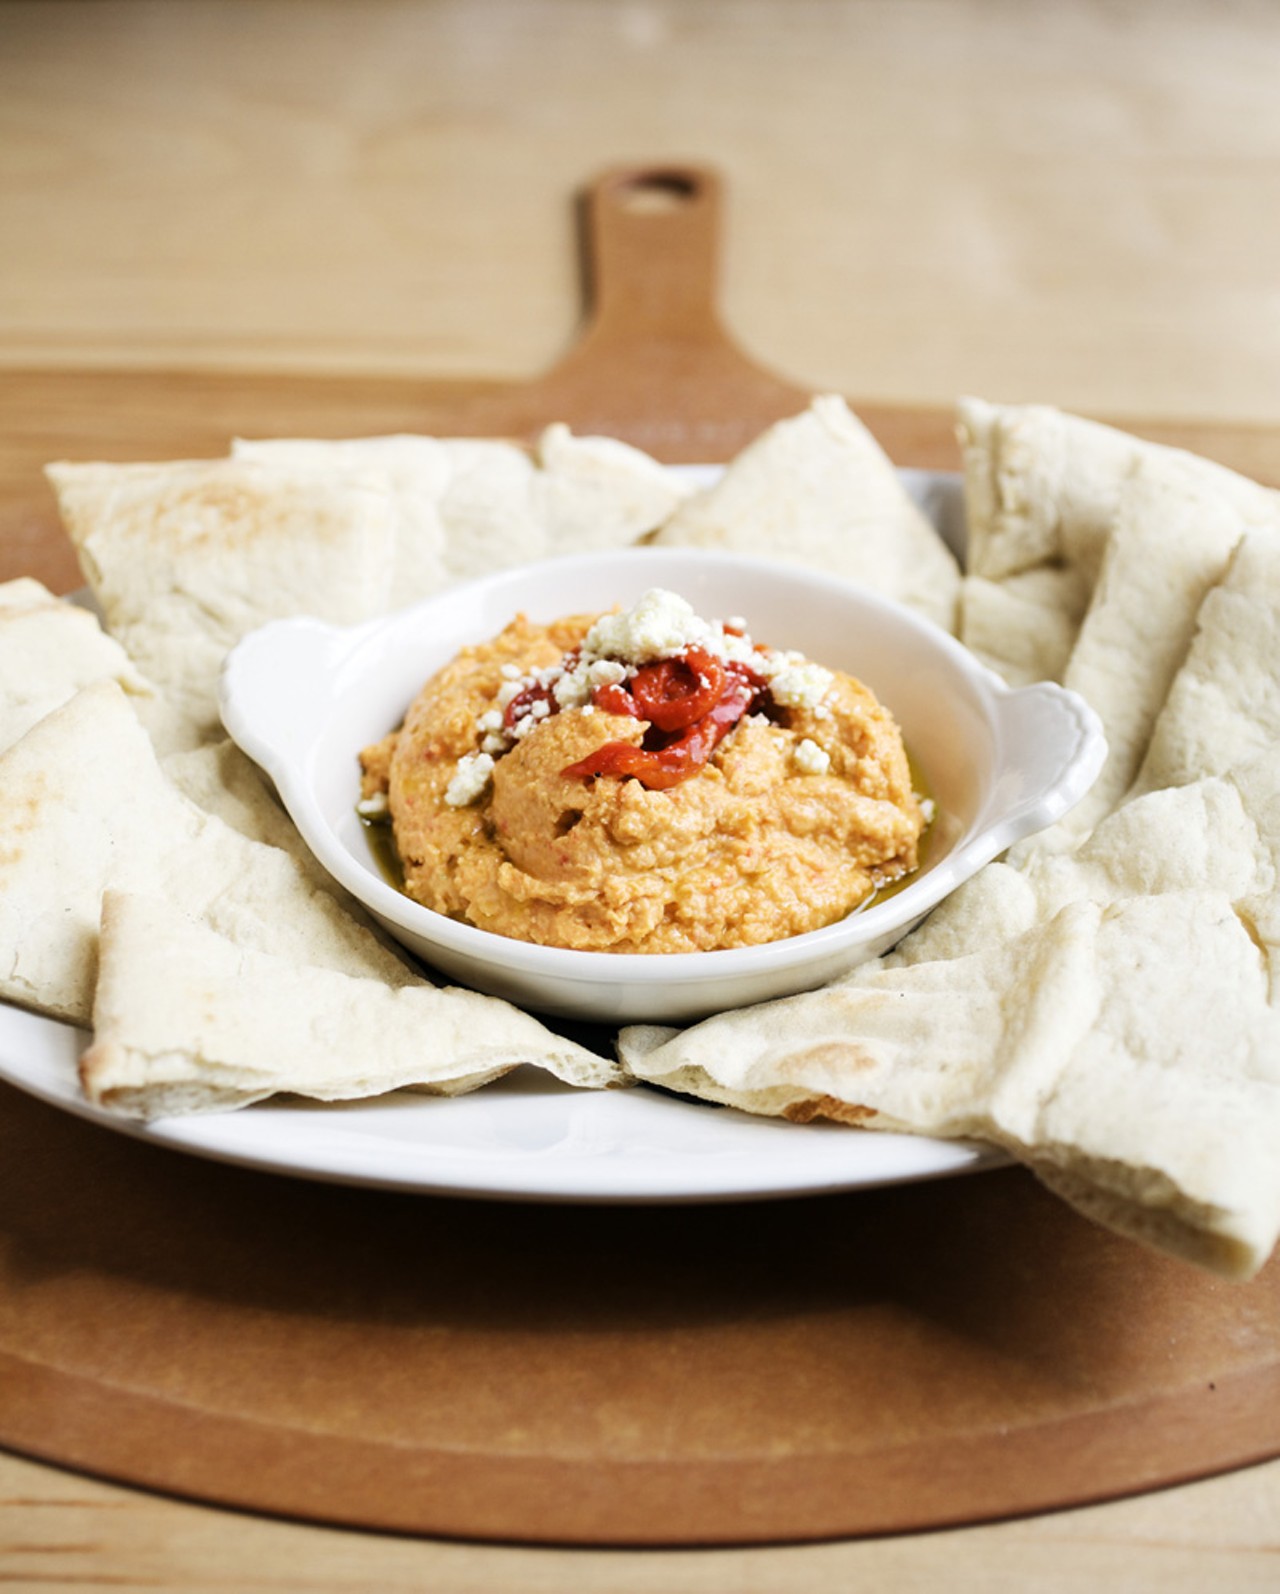 Roasted Red Pepper Hummus appetizer is served with warm pita or fresh vegetables (not shown.)